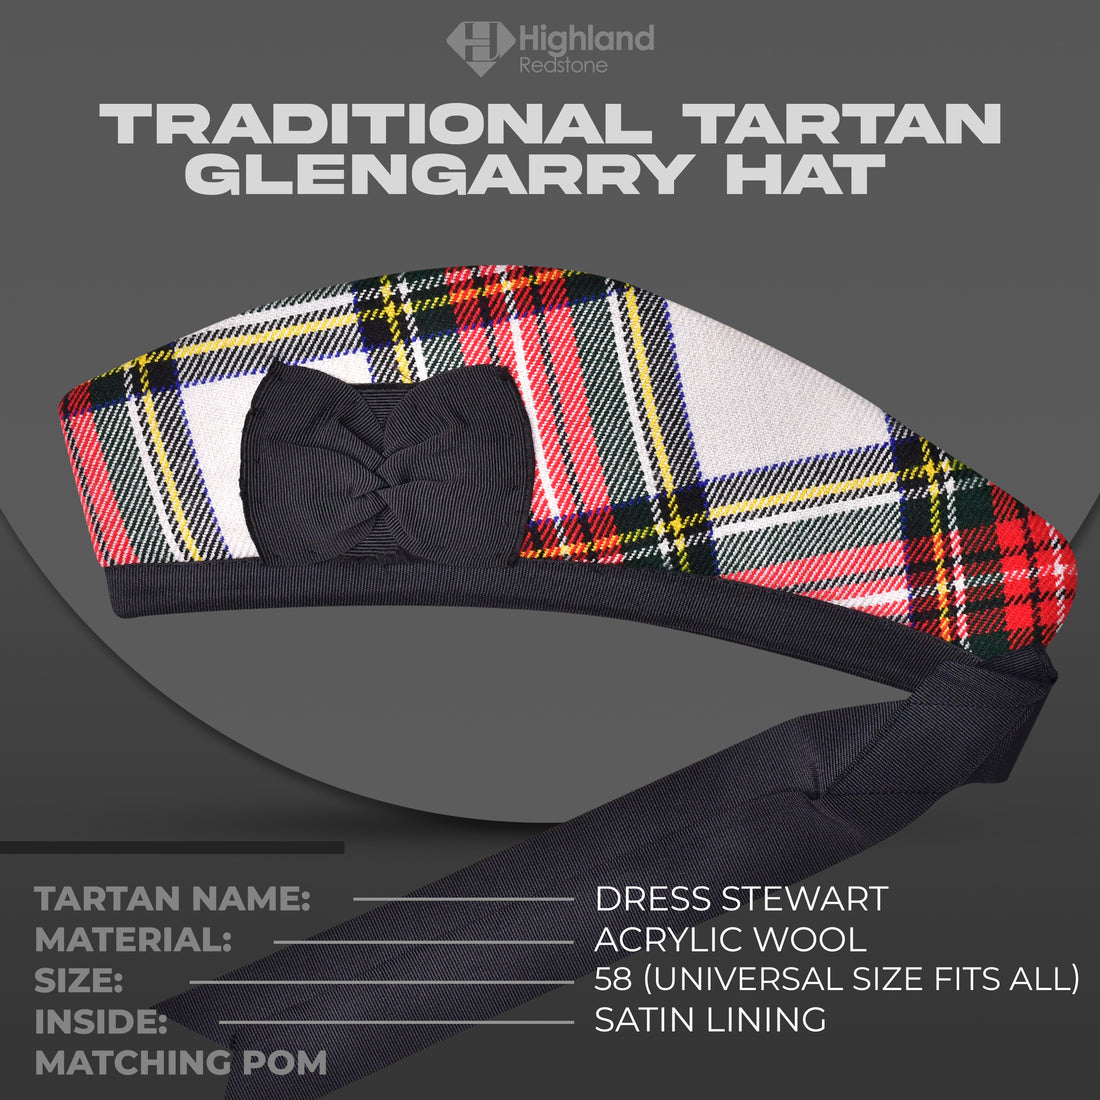 Dress Stewart Tartan Glengarry featuring the iconic red, white, and blue pattern of the Stewart Clan, made from high-quality materials.